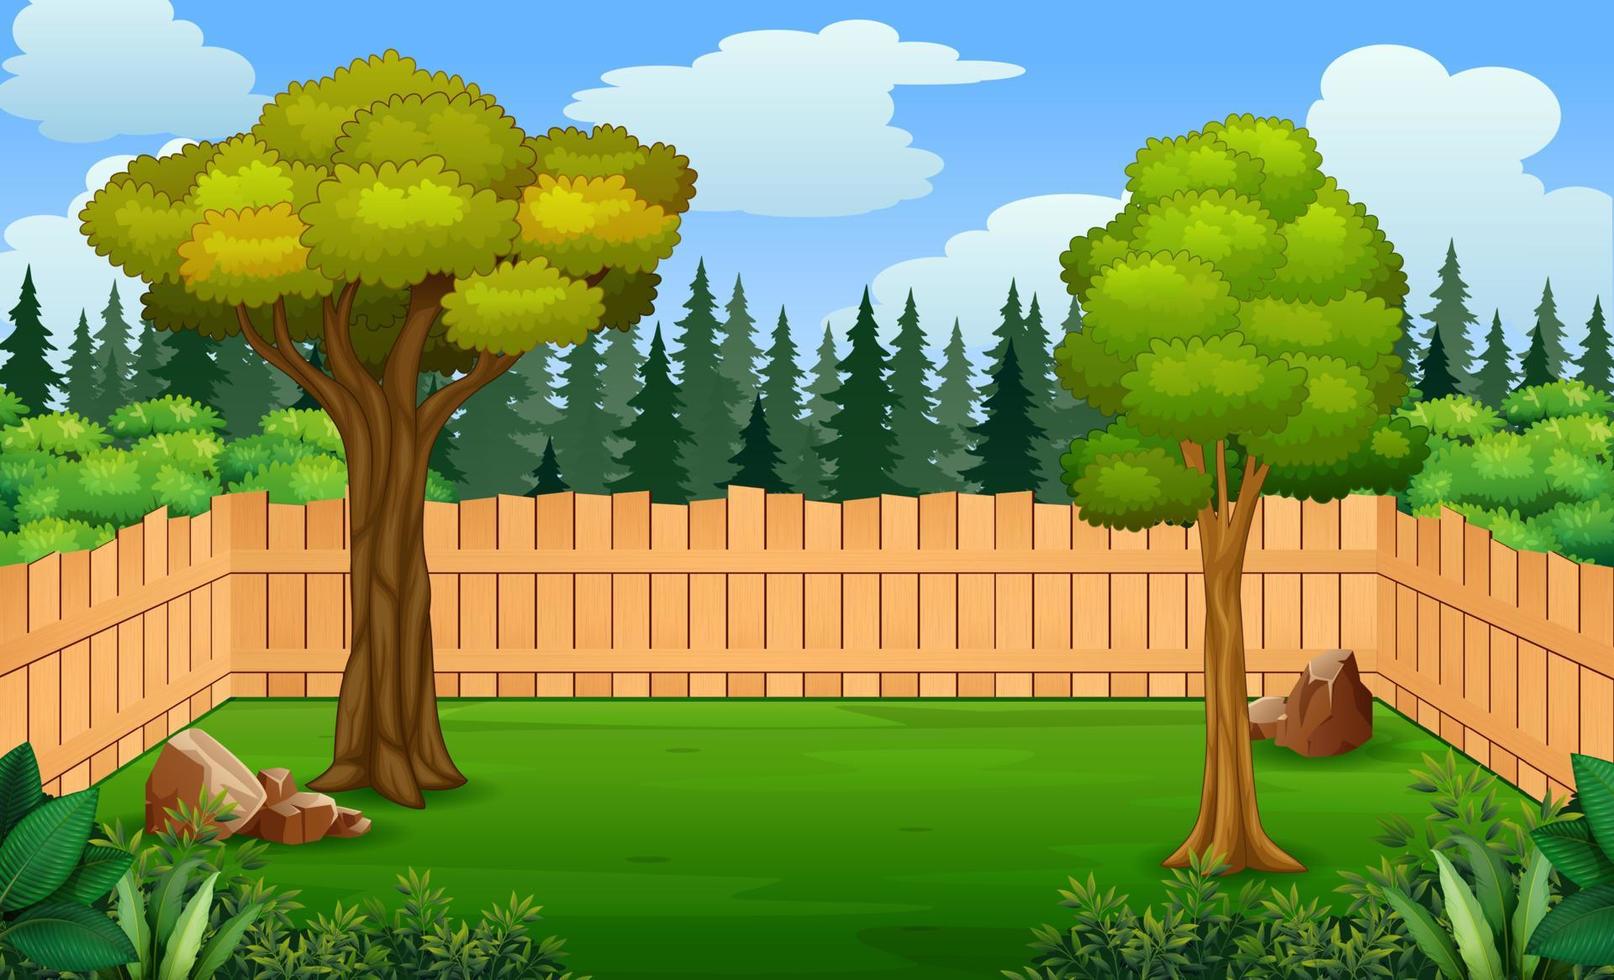 Wooden fence and trees on the backyard illustration 6635321 Vector Art ...